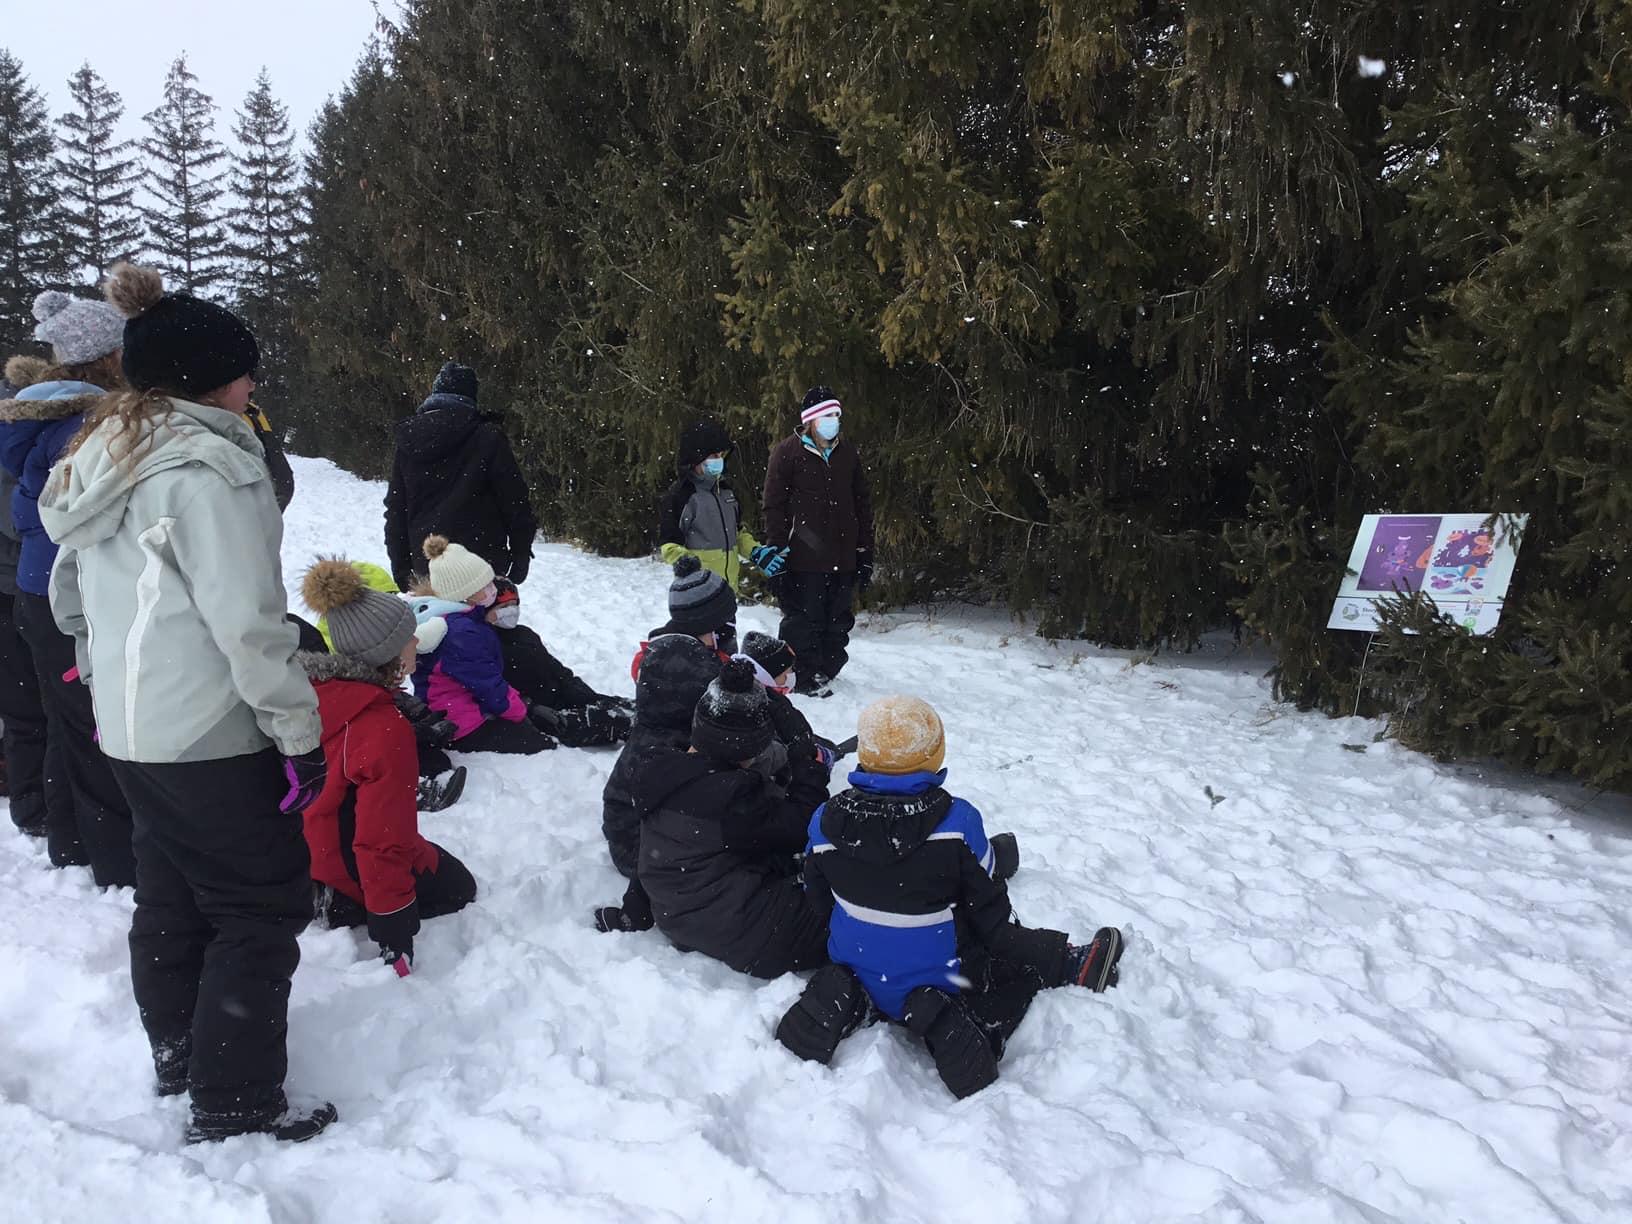 Photo showing students in winter gear on school grounds, looking at sign containing part of a story